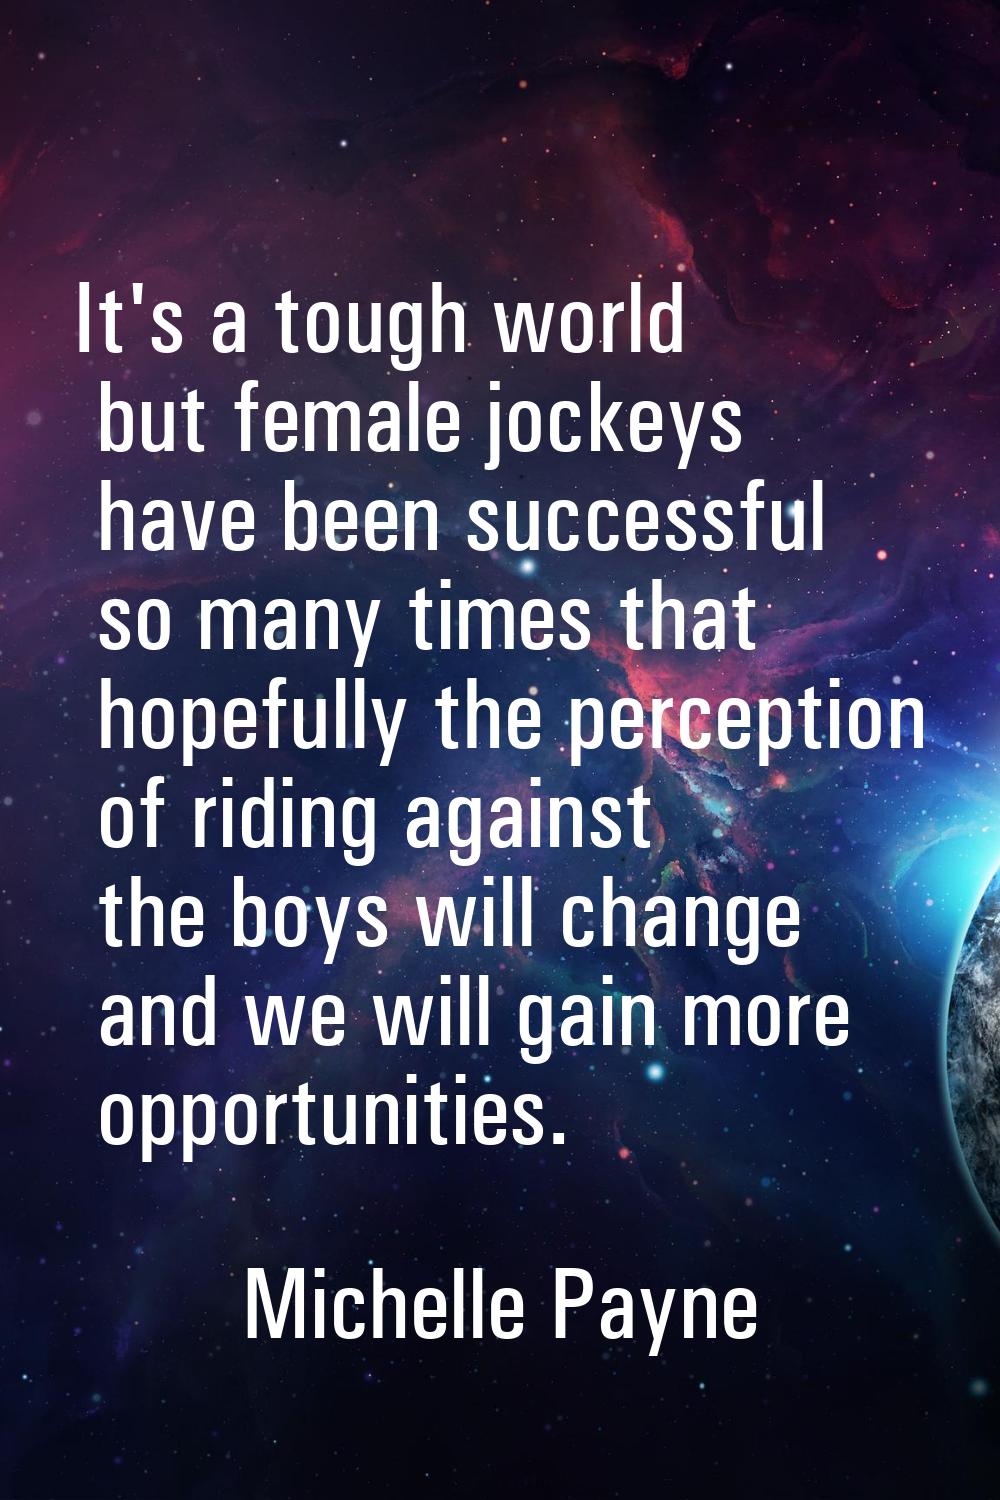 It's a tough world but female jockeys have been successful so many times that hopefully the percept